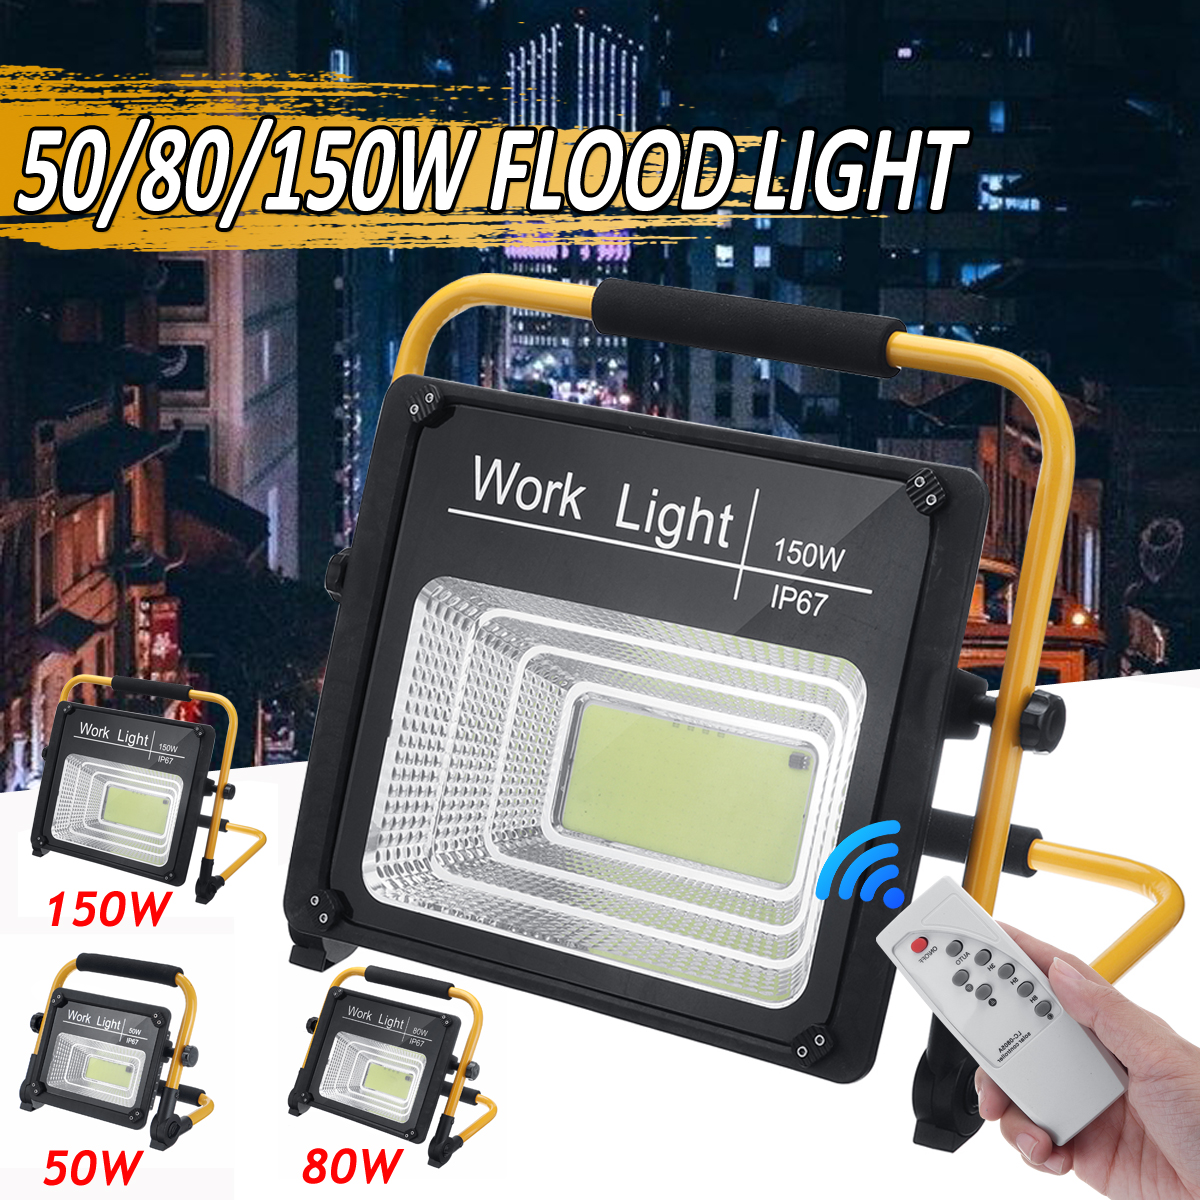 5080150W-LED-Outside-Wall-Light-Garden-Security-Flood-Light-IP67--Remote-Control-1650789-1